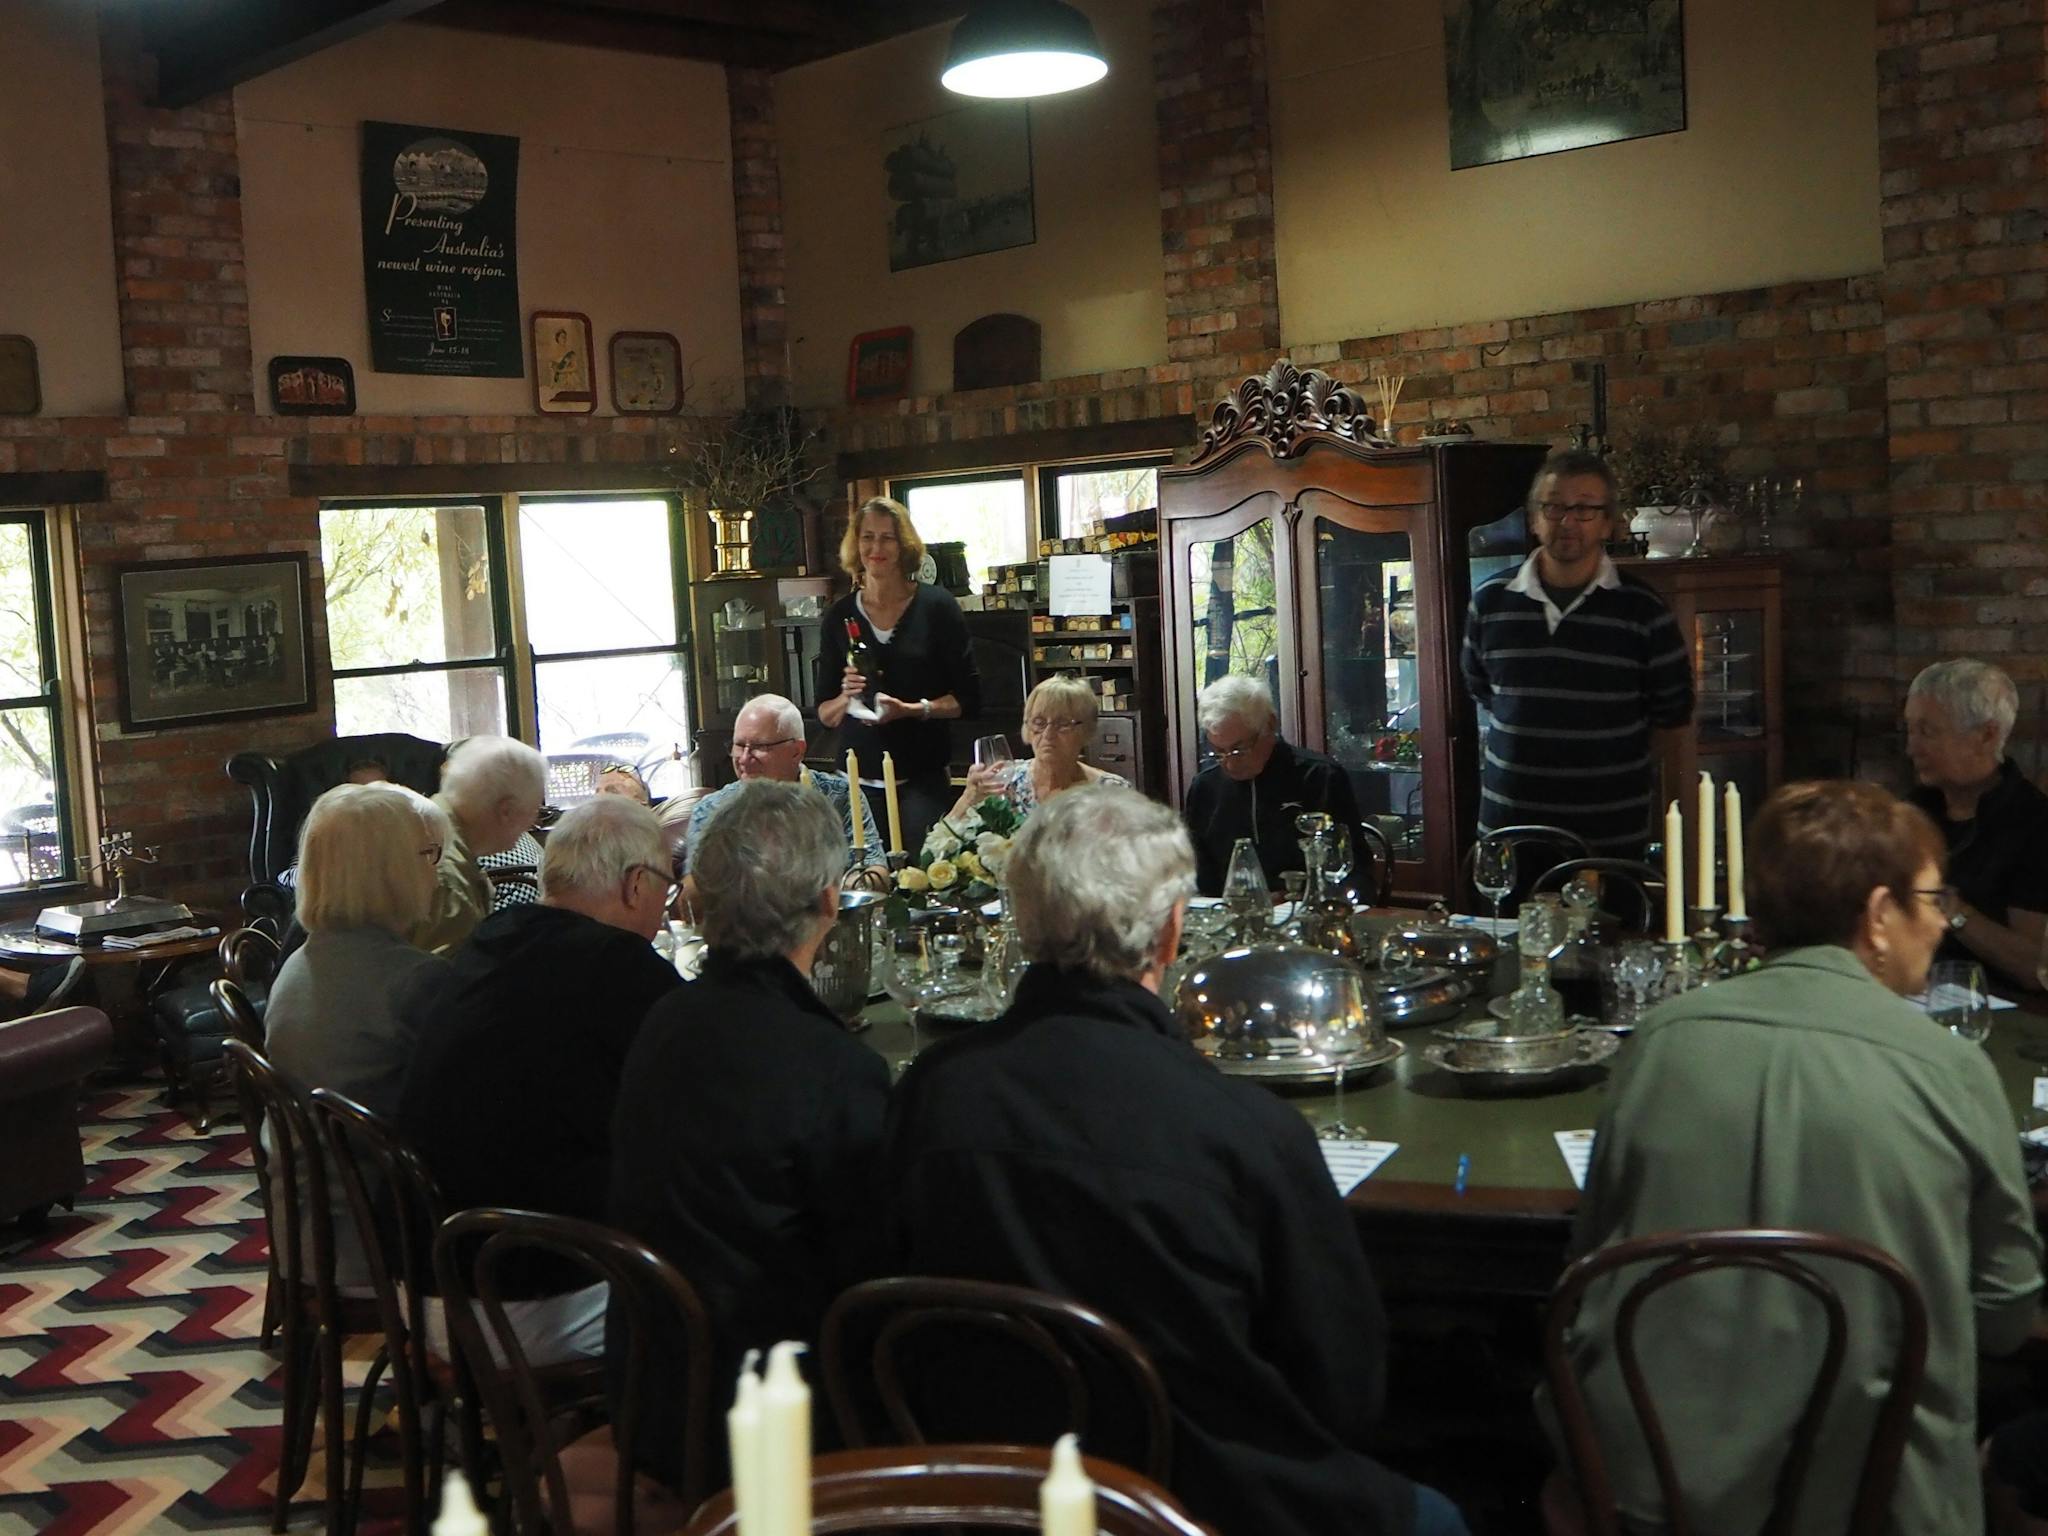 Wine Tasting seated at Queensland's First Table used by the Executive Council in 1859